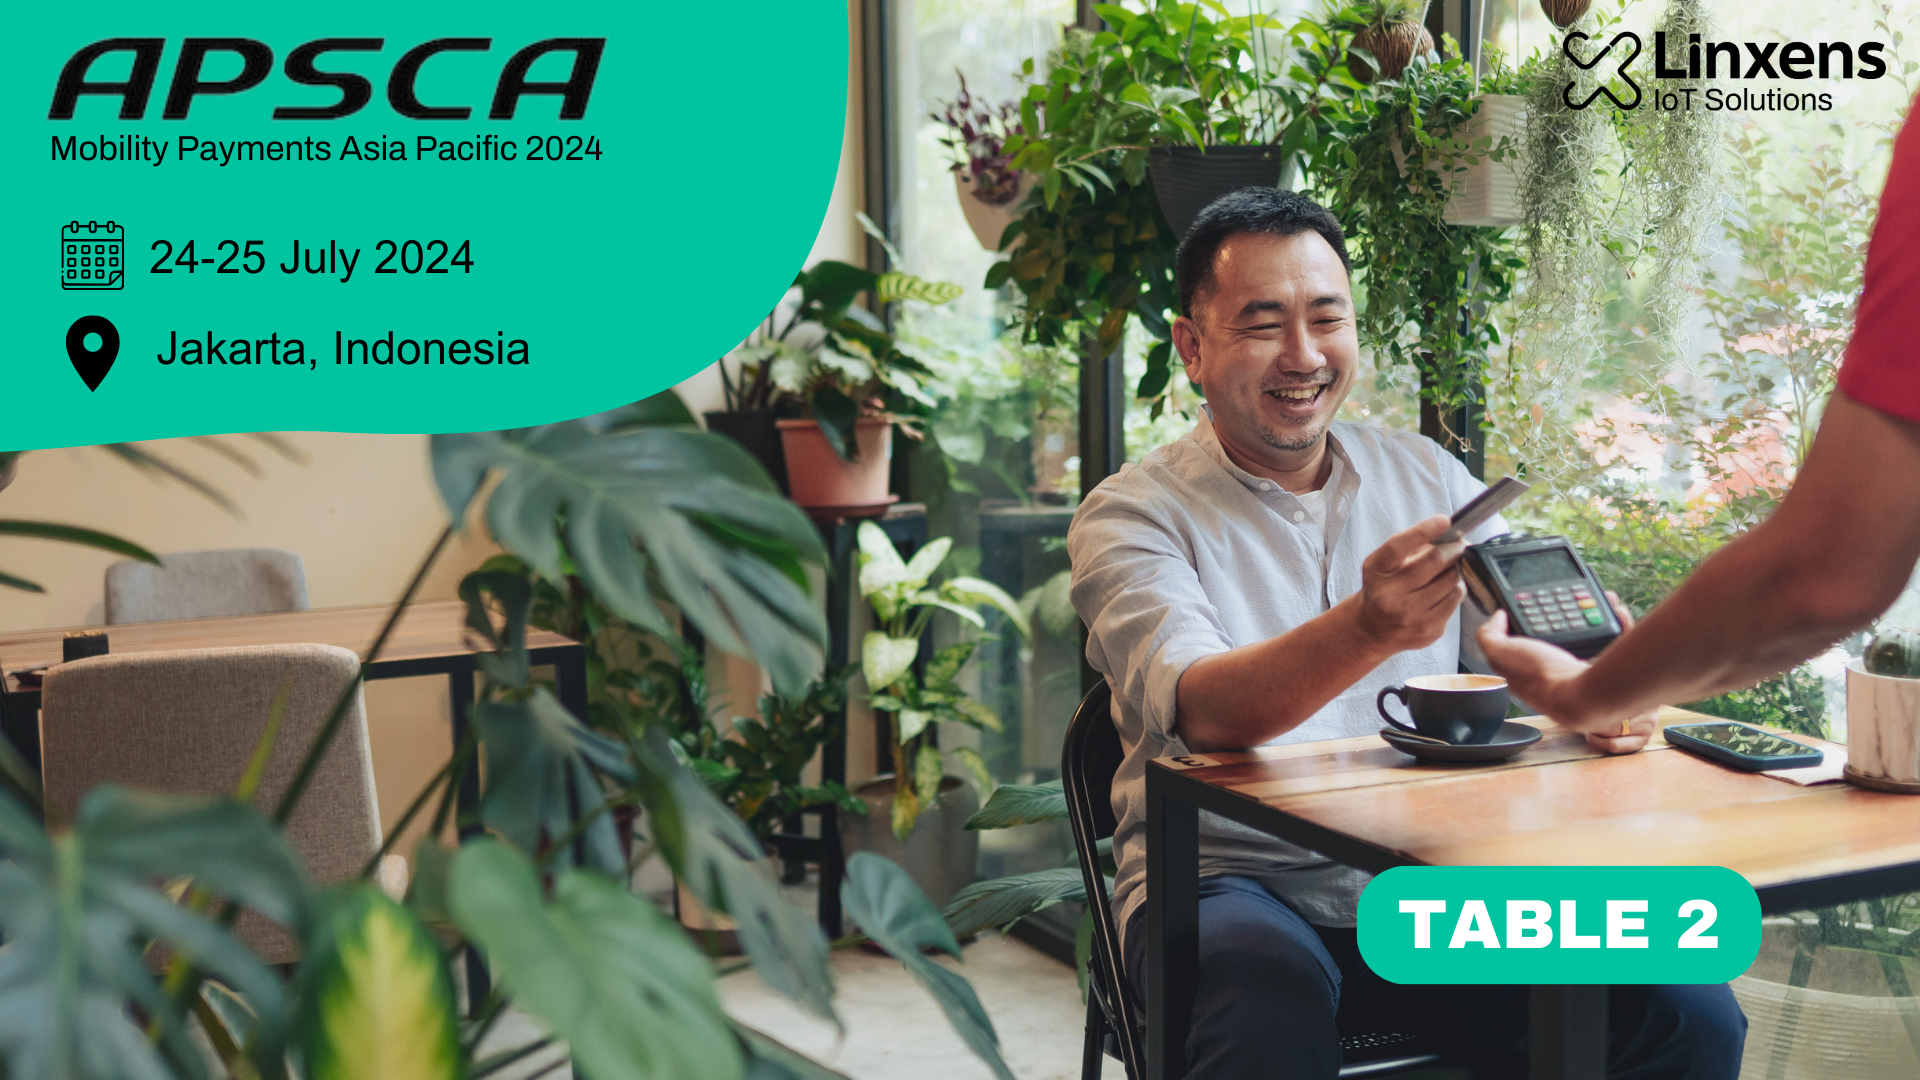 APSCA Mobility Payments Asia Pacific 2024